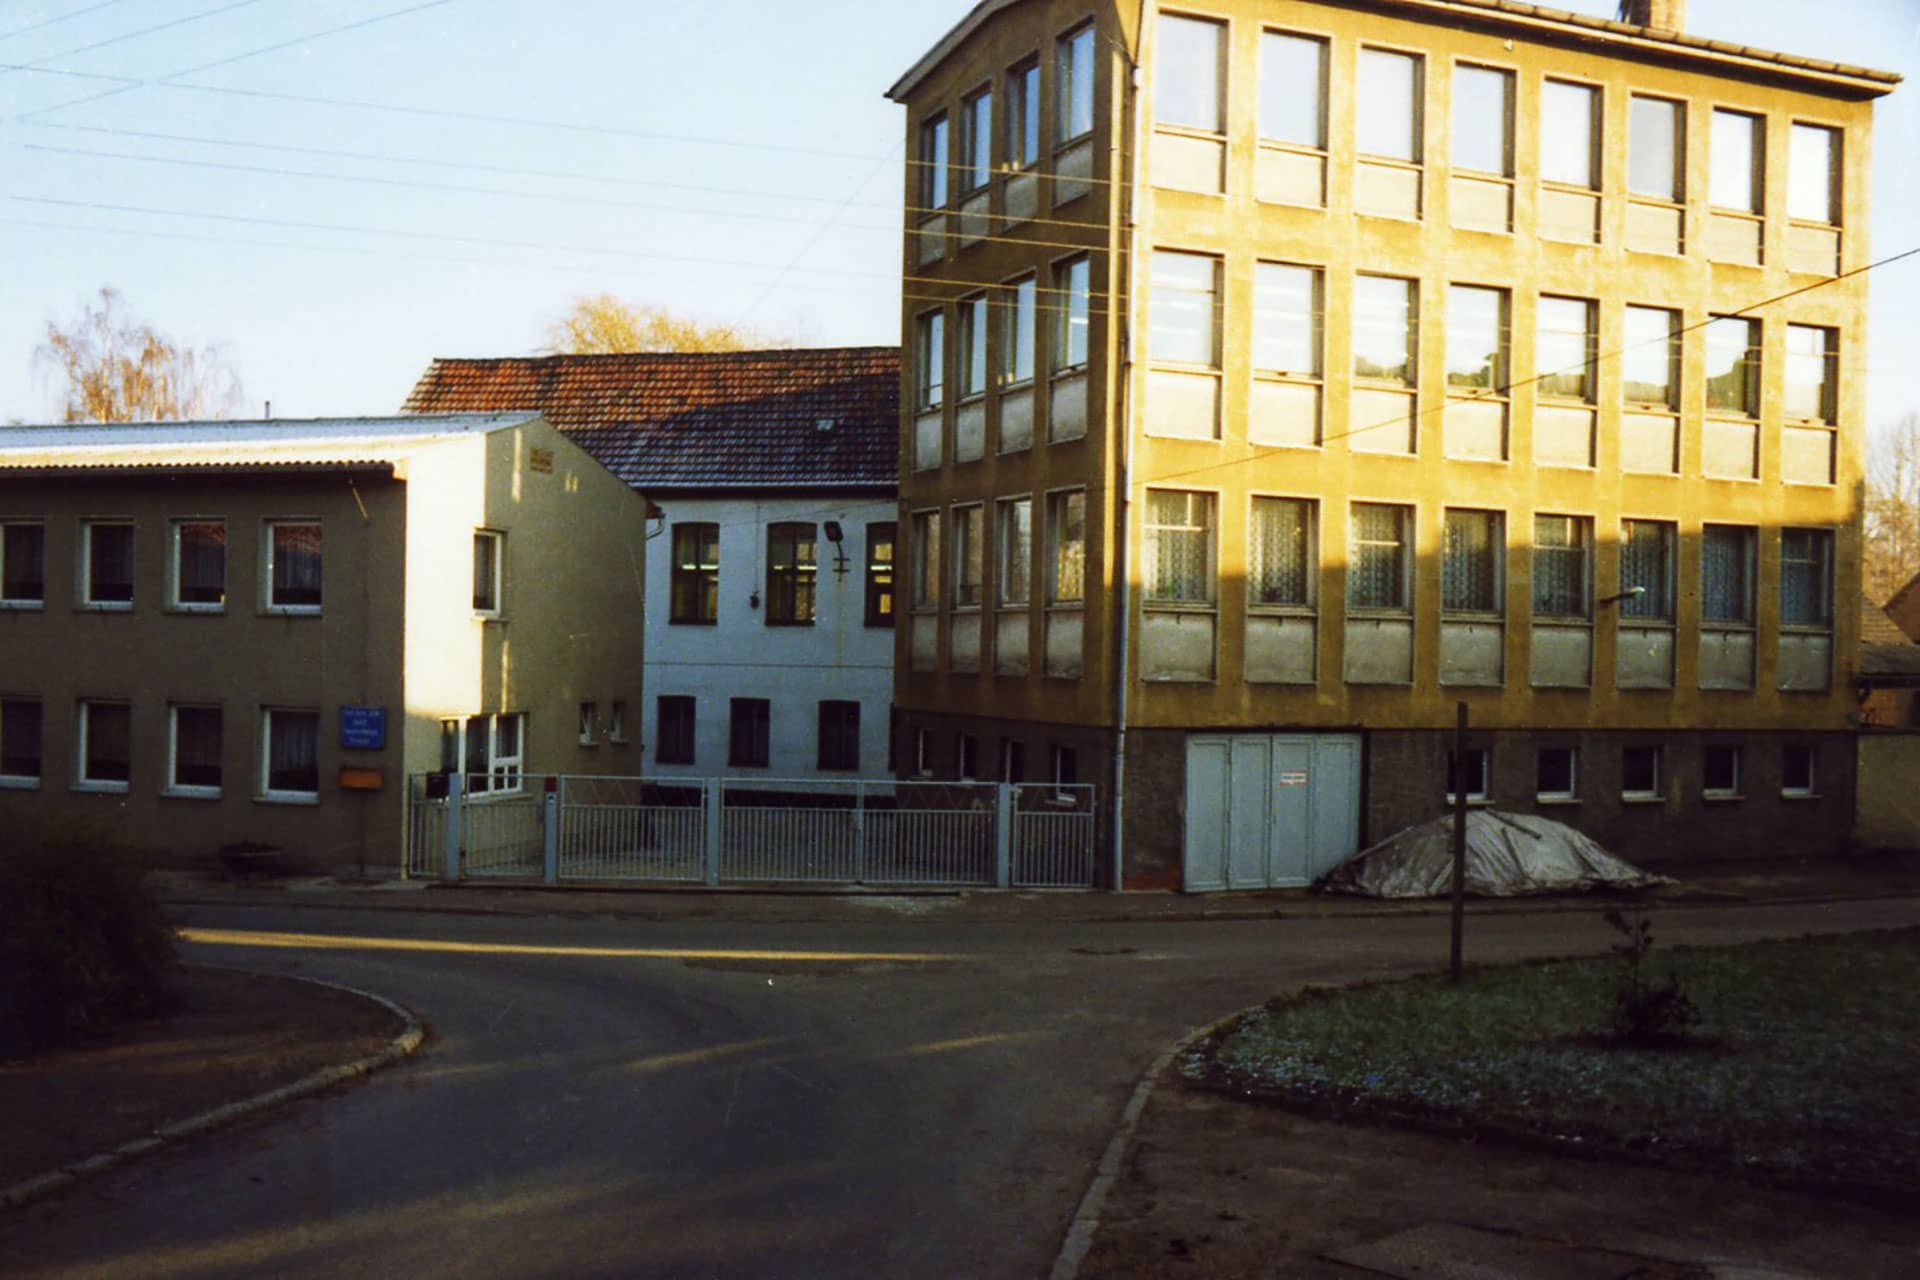 rmw production building location 1 in its founding period January 1992